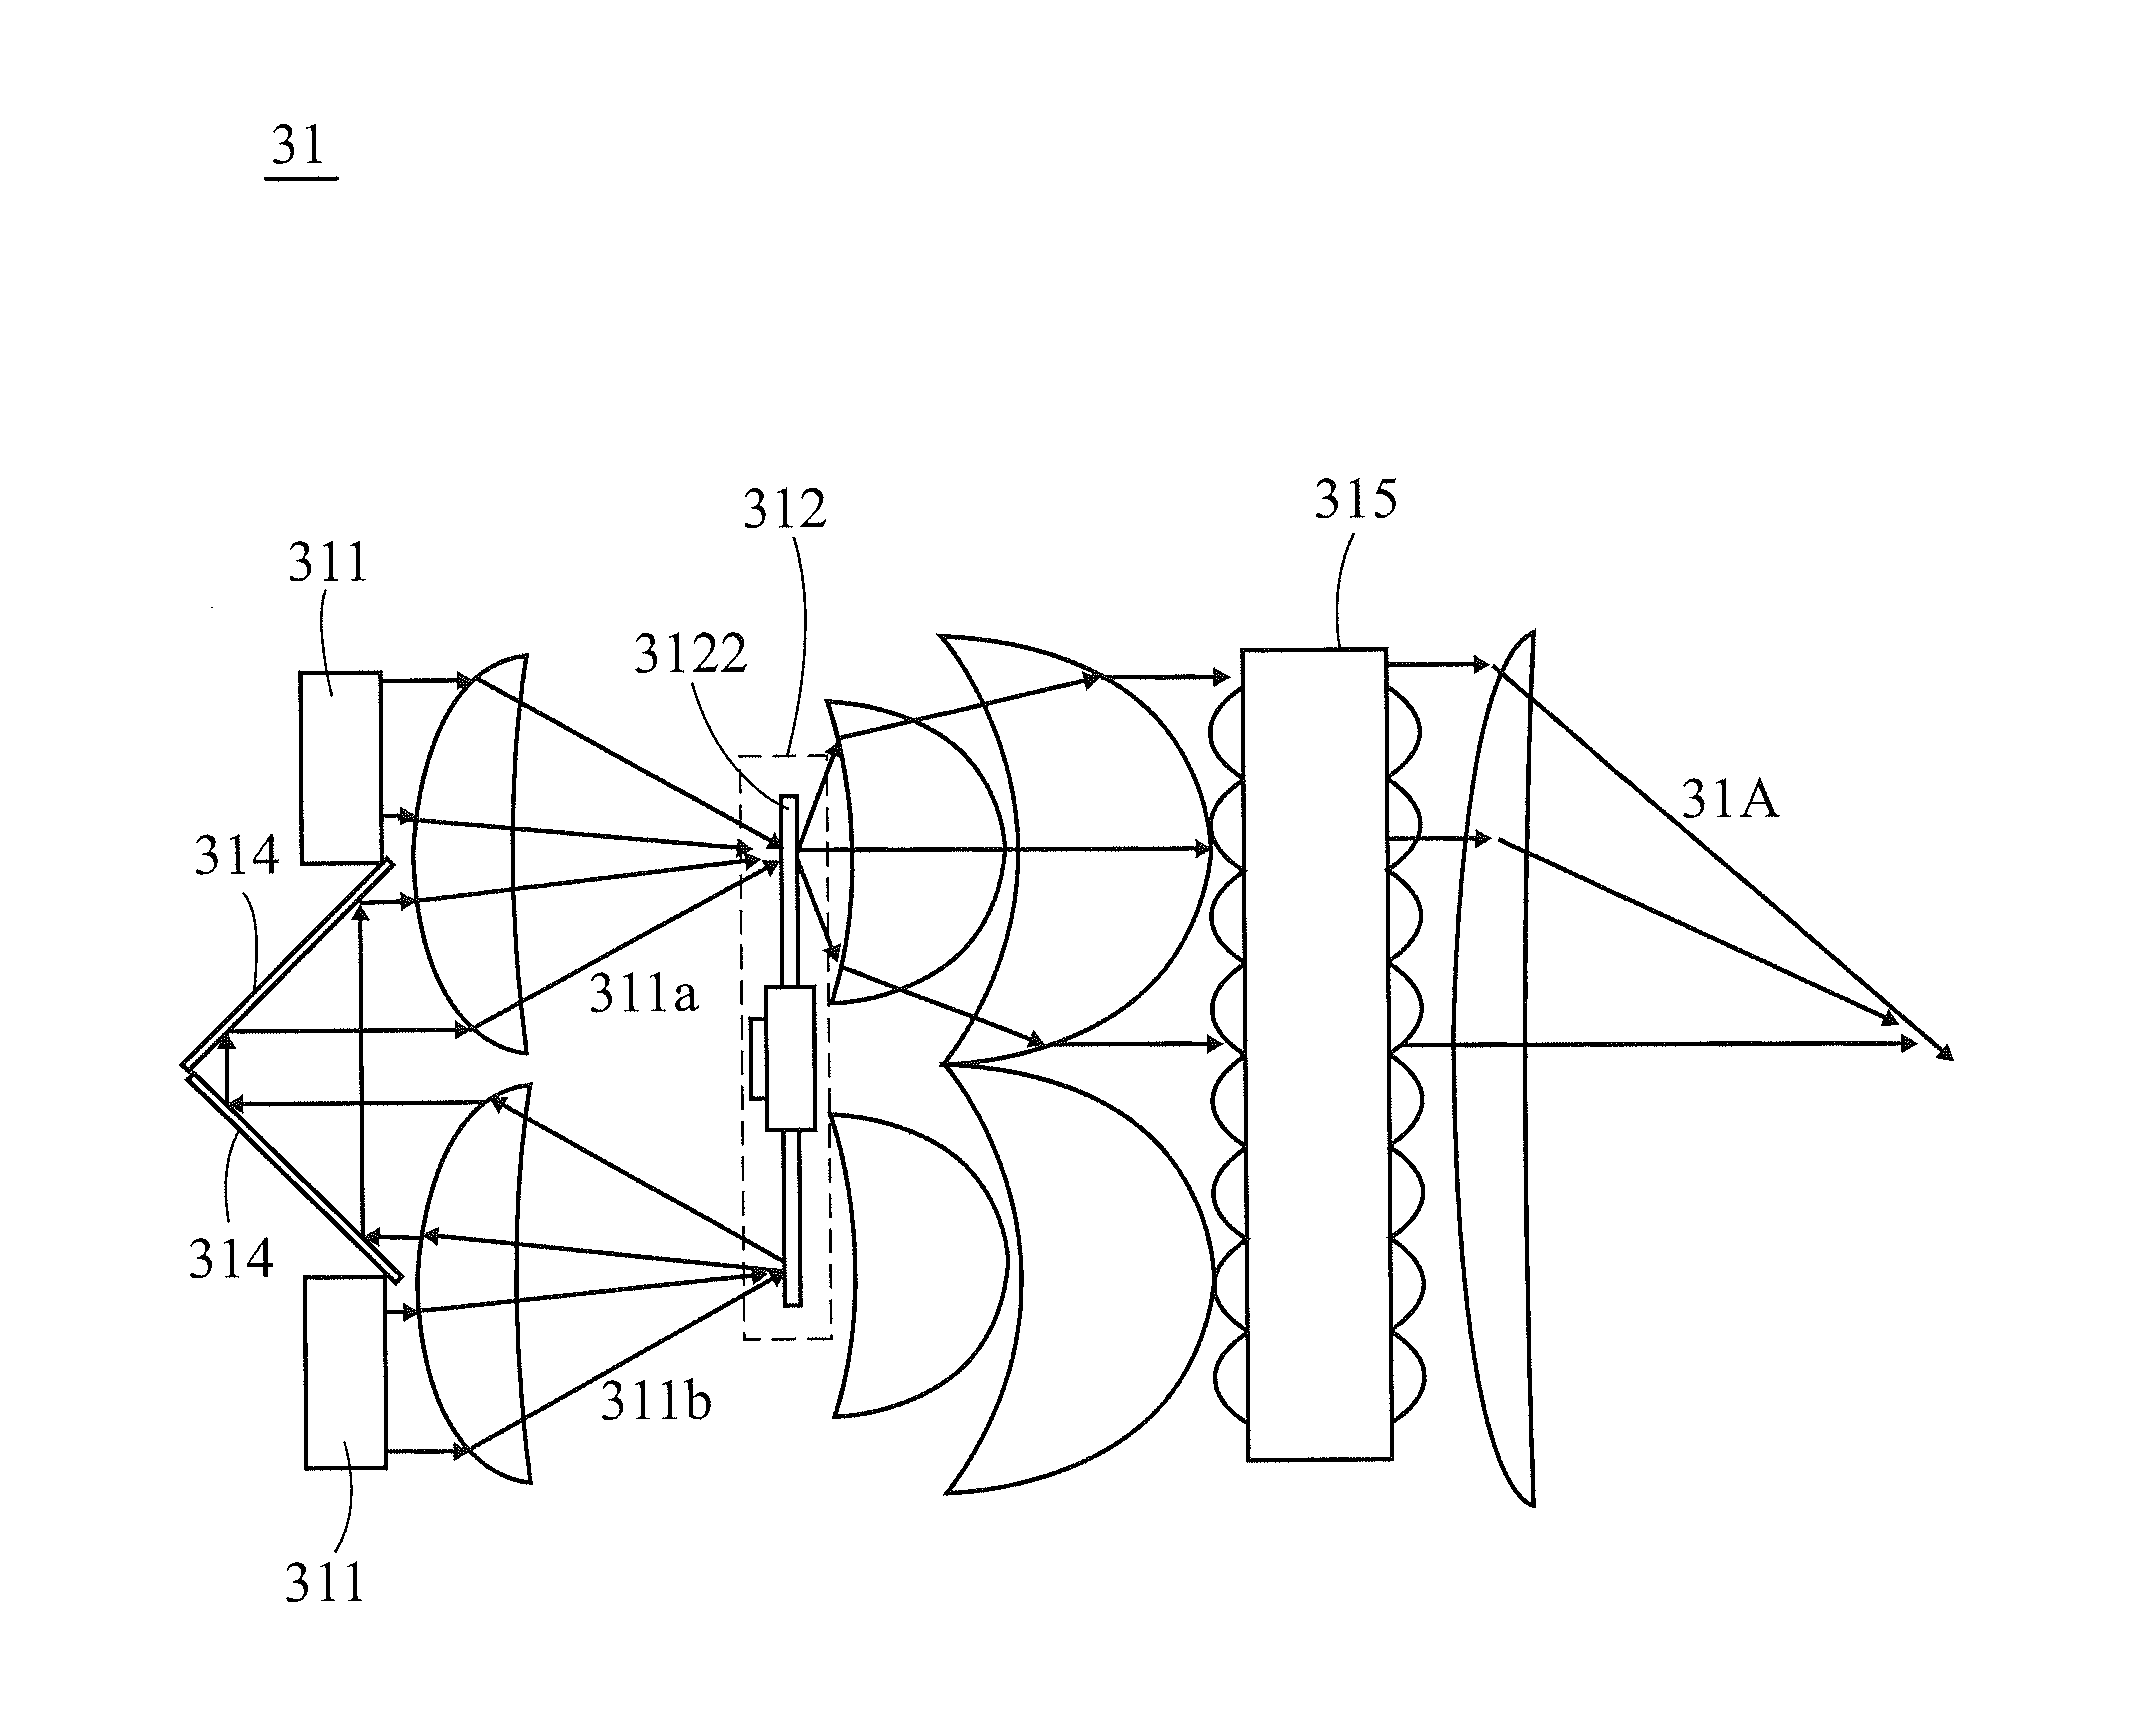 Projection apparatus for providing multiple viewing angle images